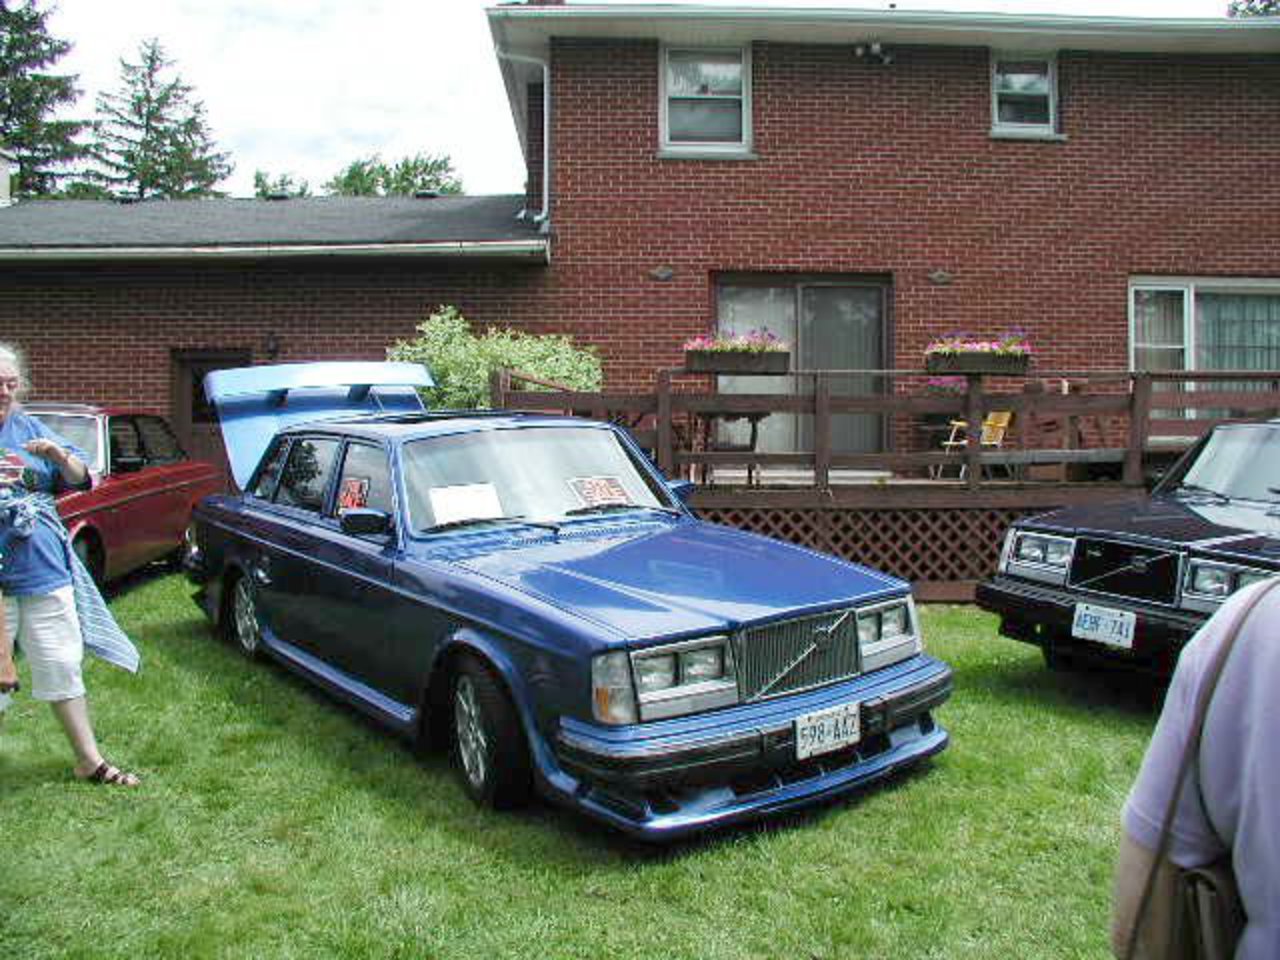 Volvo 240 GLE - cars catalog, specs, features, photos, videos, review,